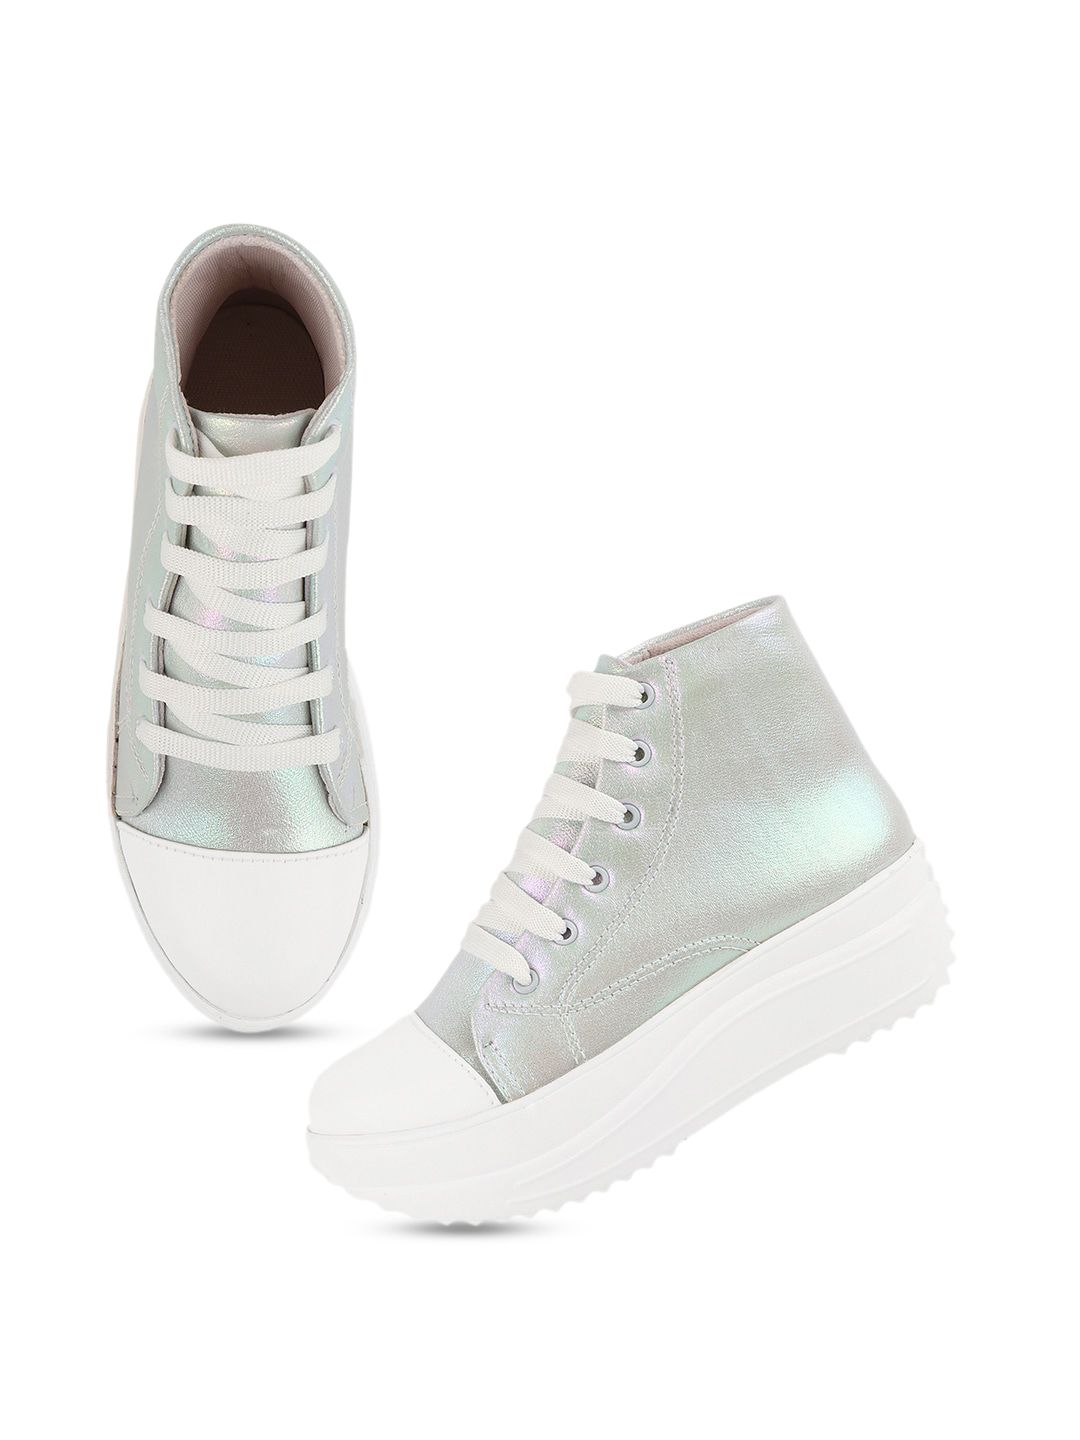 Shoetopia Women Green Colourblocked High-Top Driving Shoes Price in India